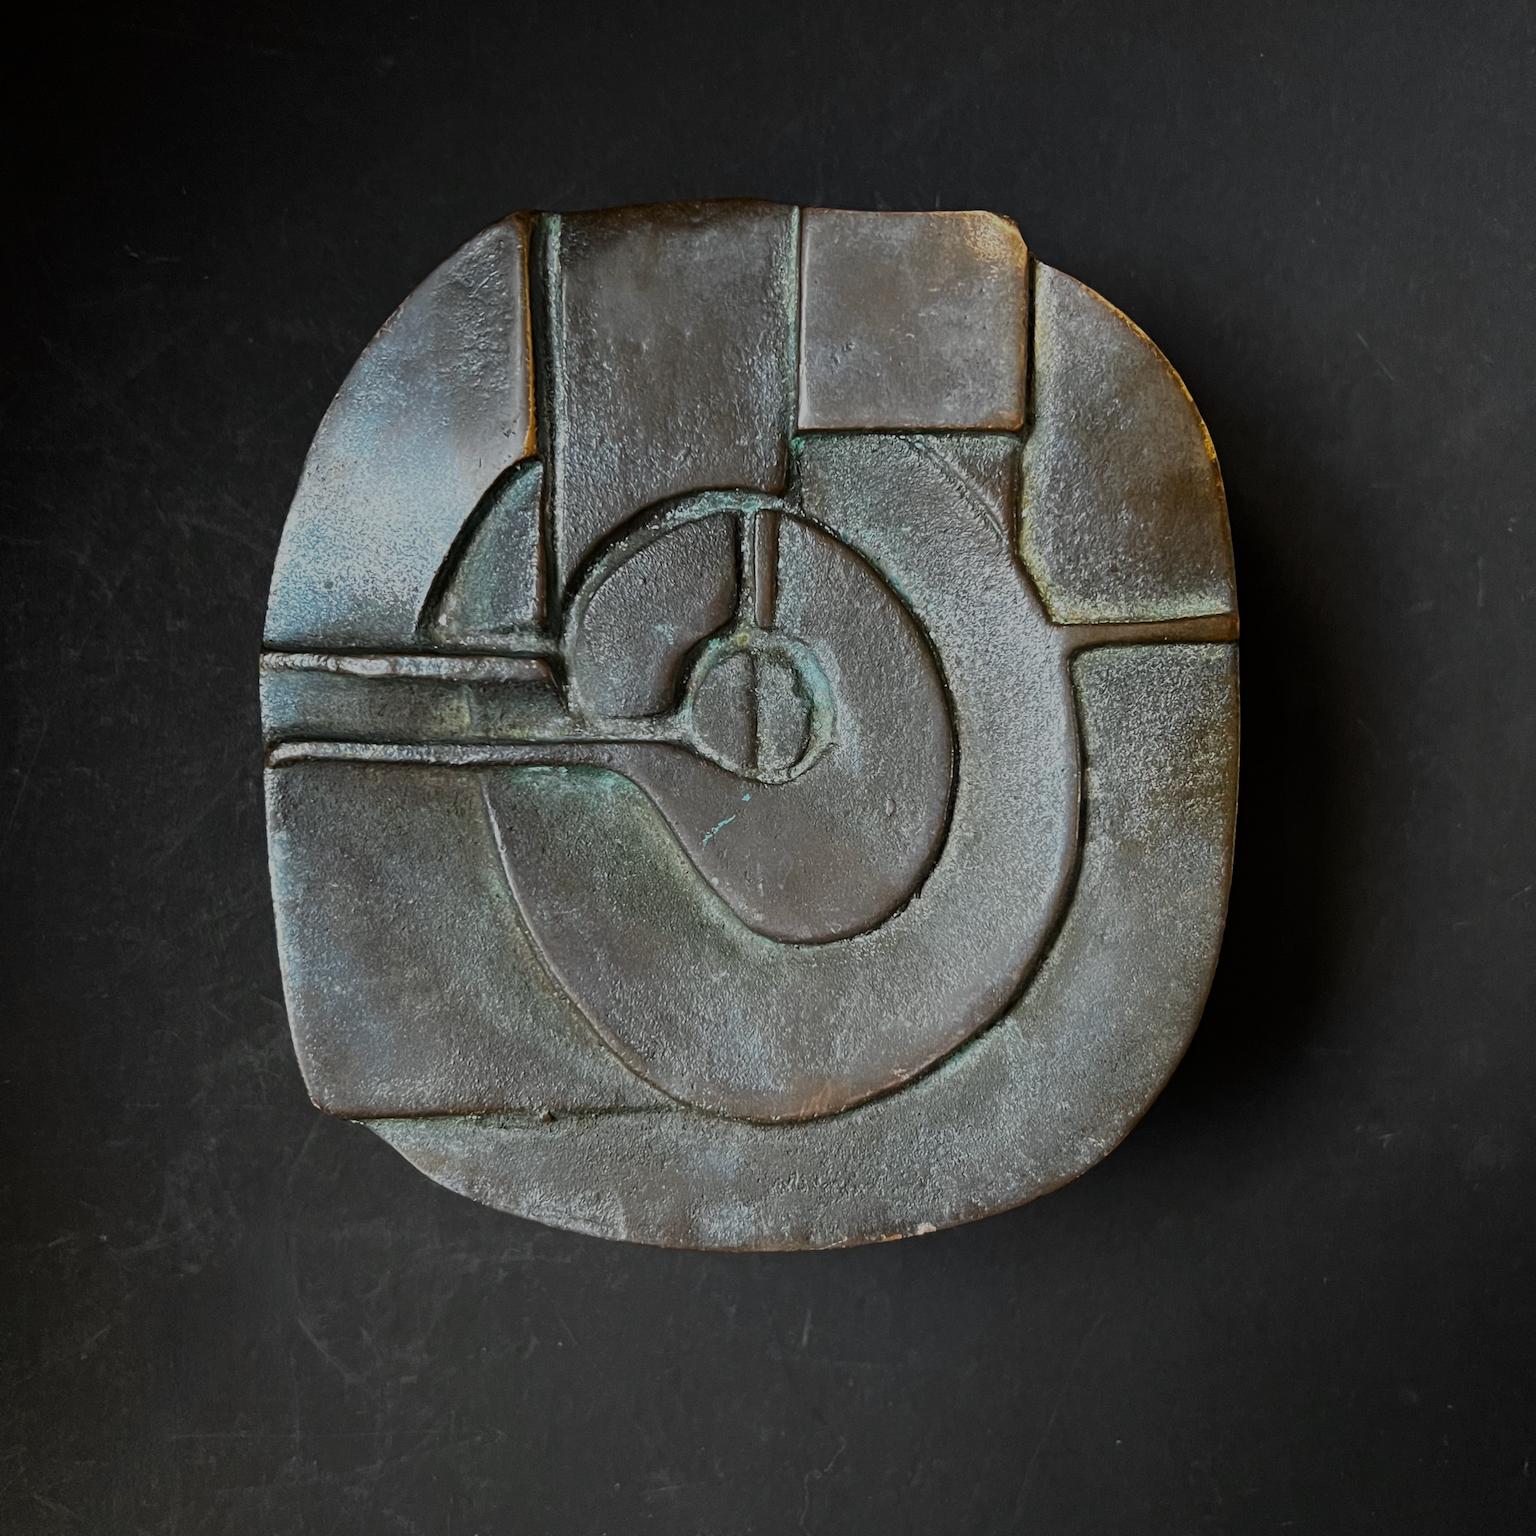 A heavy push-or-pull door handle made of cast bronze featuring a raised abstract pattern and texturing to the edges and bracket. 20th century design, found in Germany.

The piece is in good vintage condition with a dark brown/green patina to the